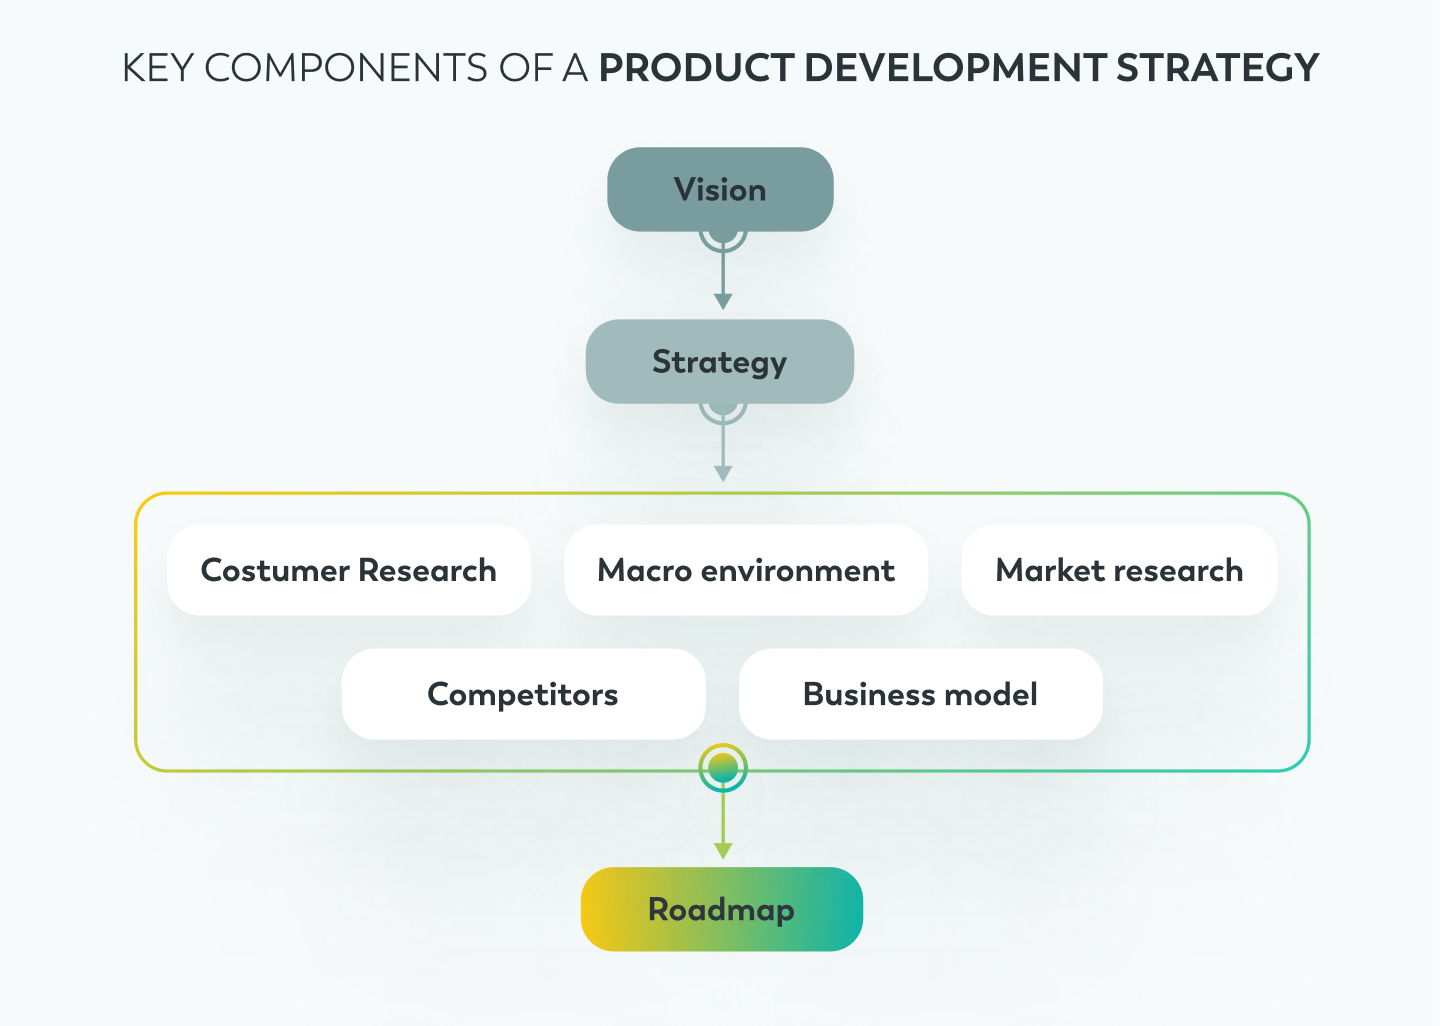 Key components of a product development strategy